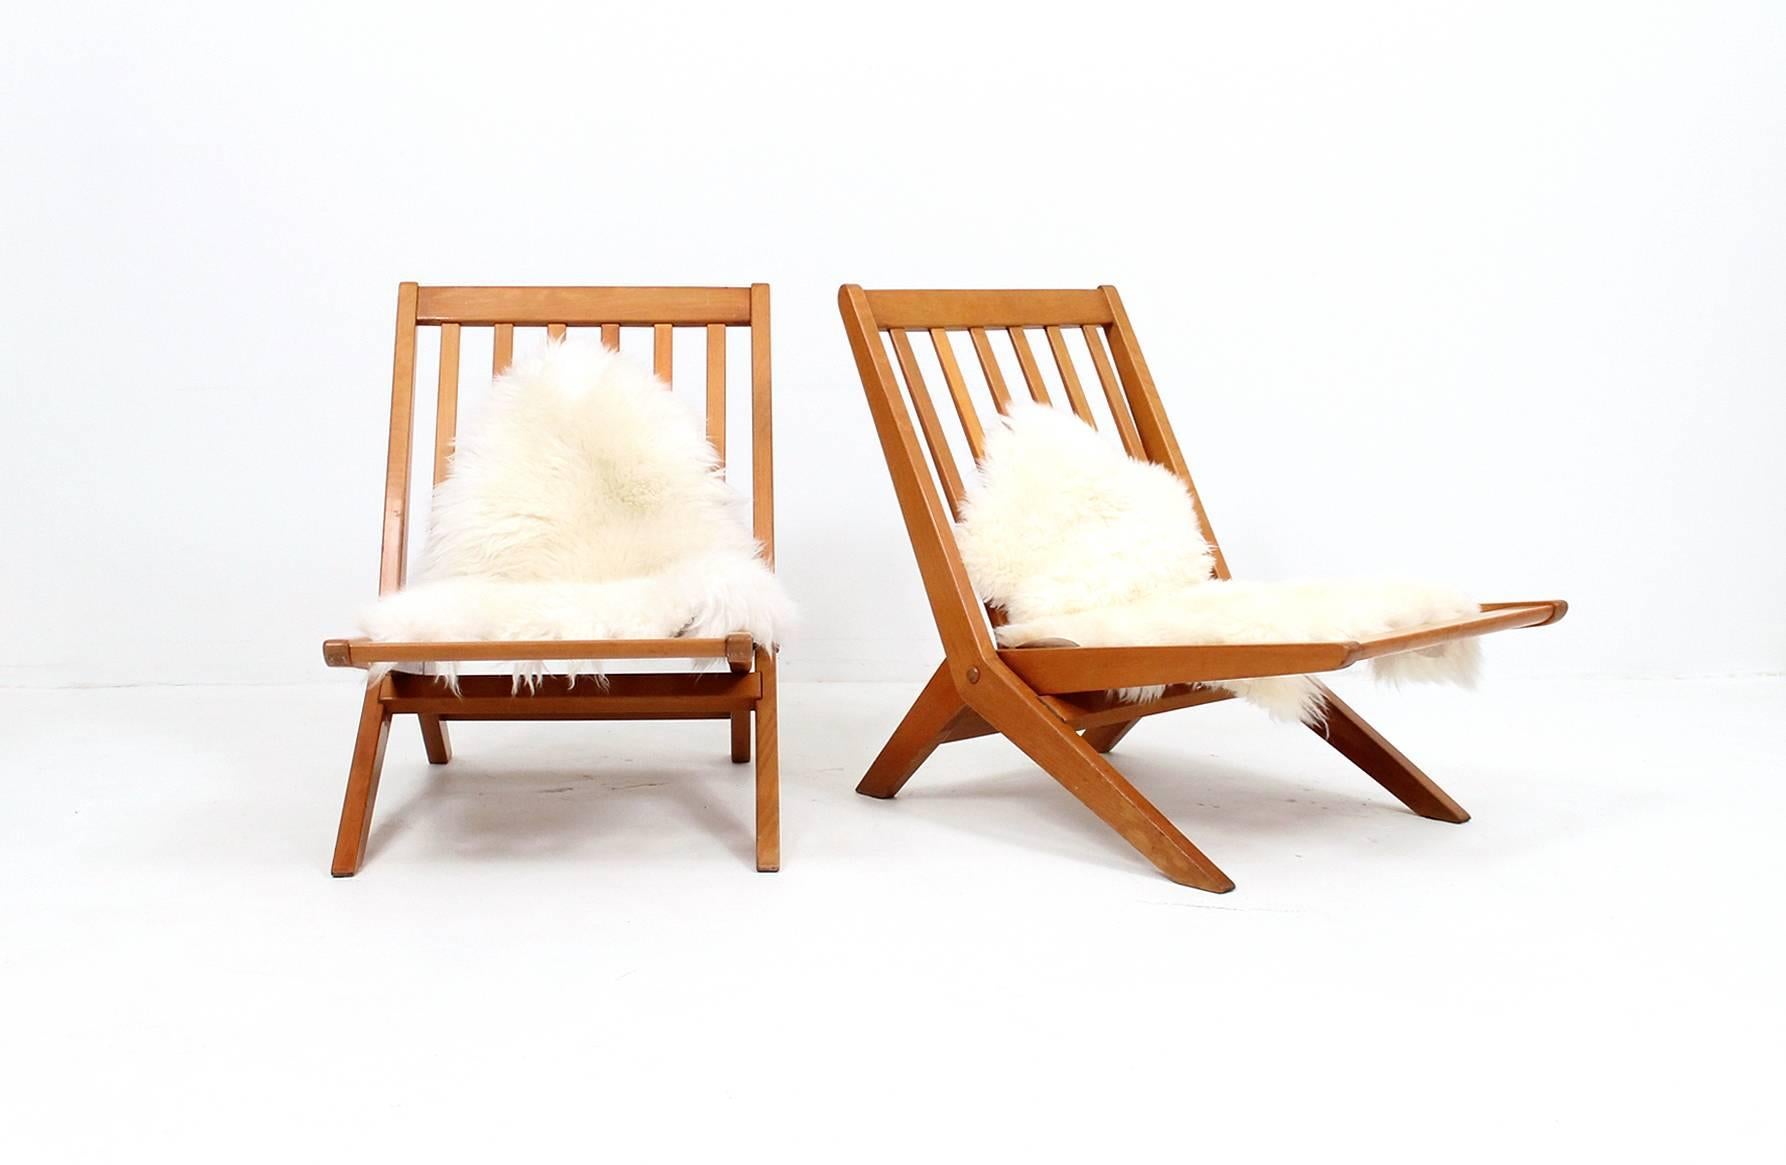 Pair of rare Peter Hvidt + Orla Molgaard-Nielsen folding scissor chairs for France + Daverkosen. These are Model No. 171. Chairs fold for easy storage. Comfortable seating with the addition of a sheepskin as a cushion.
